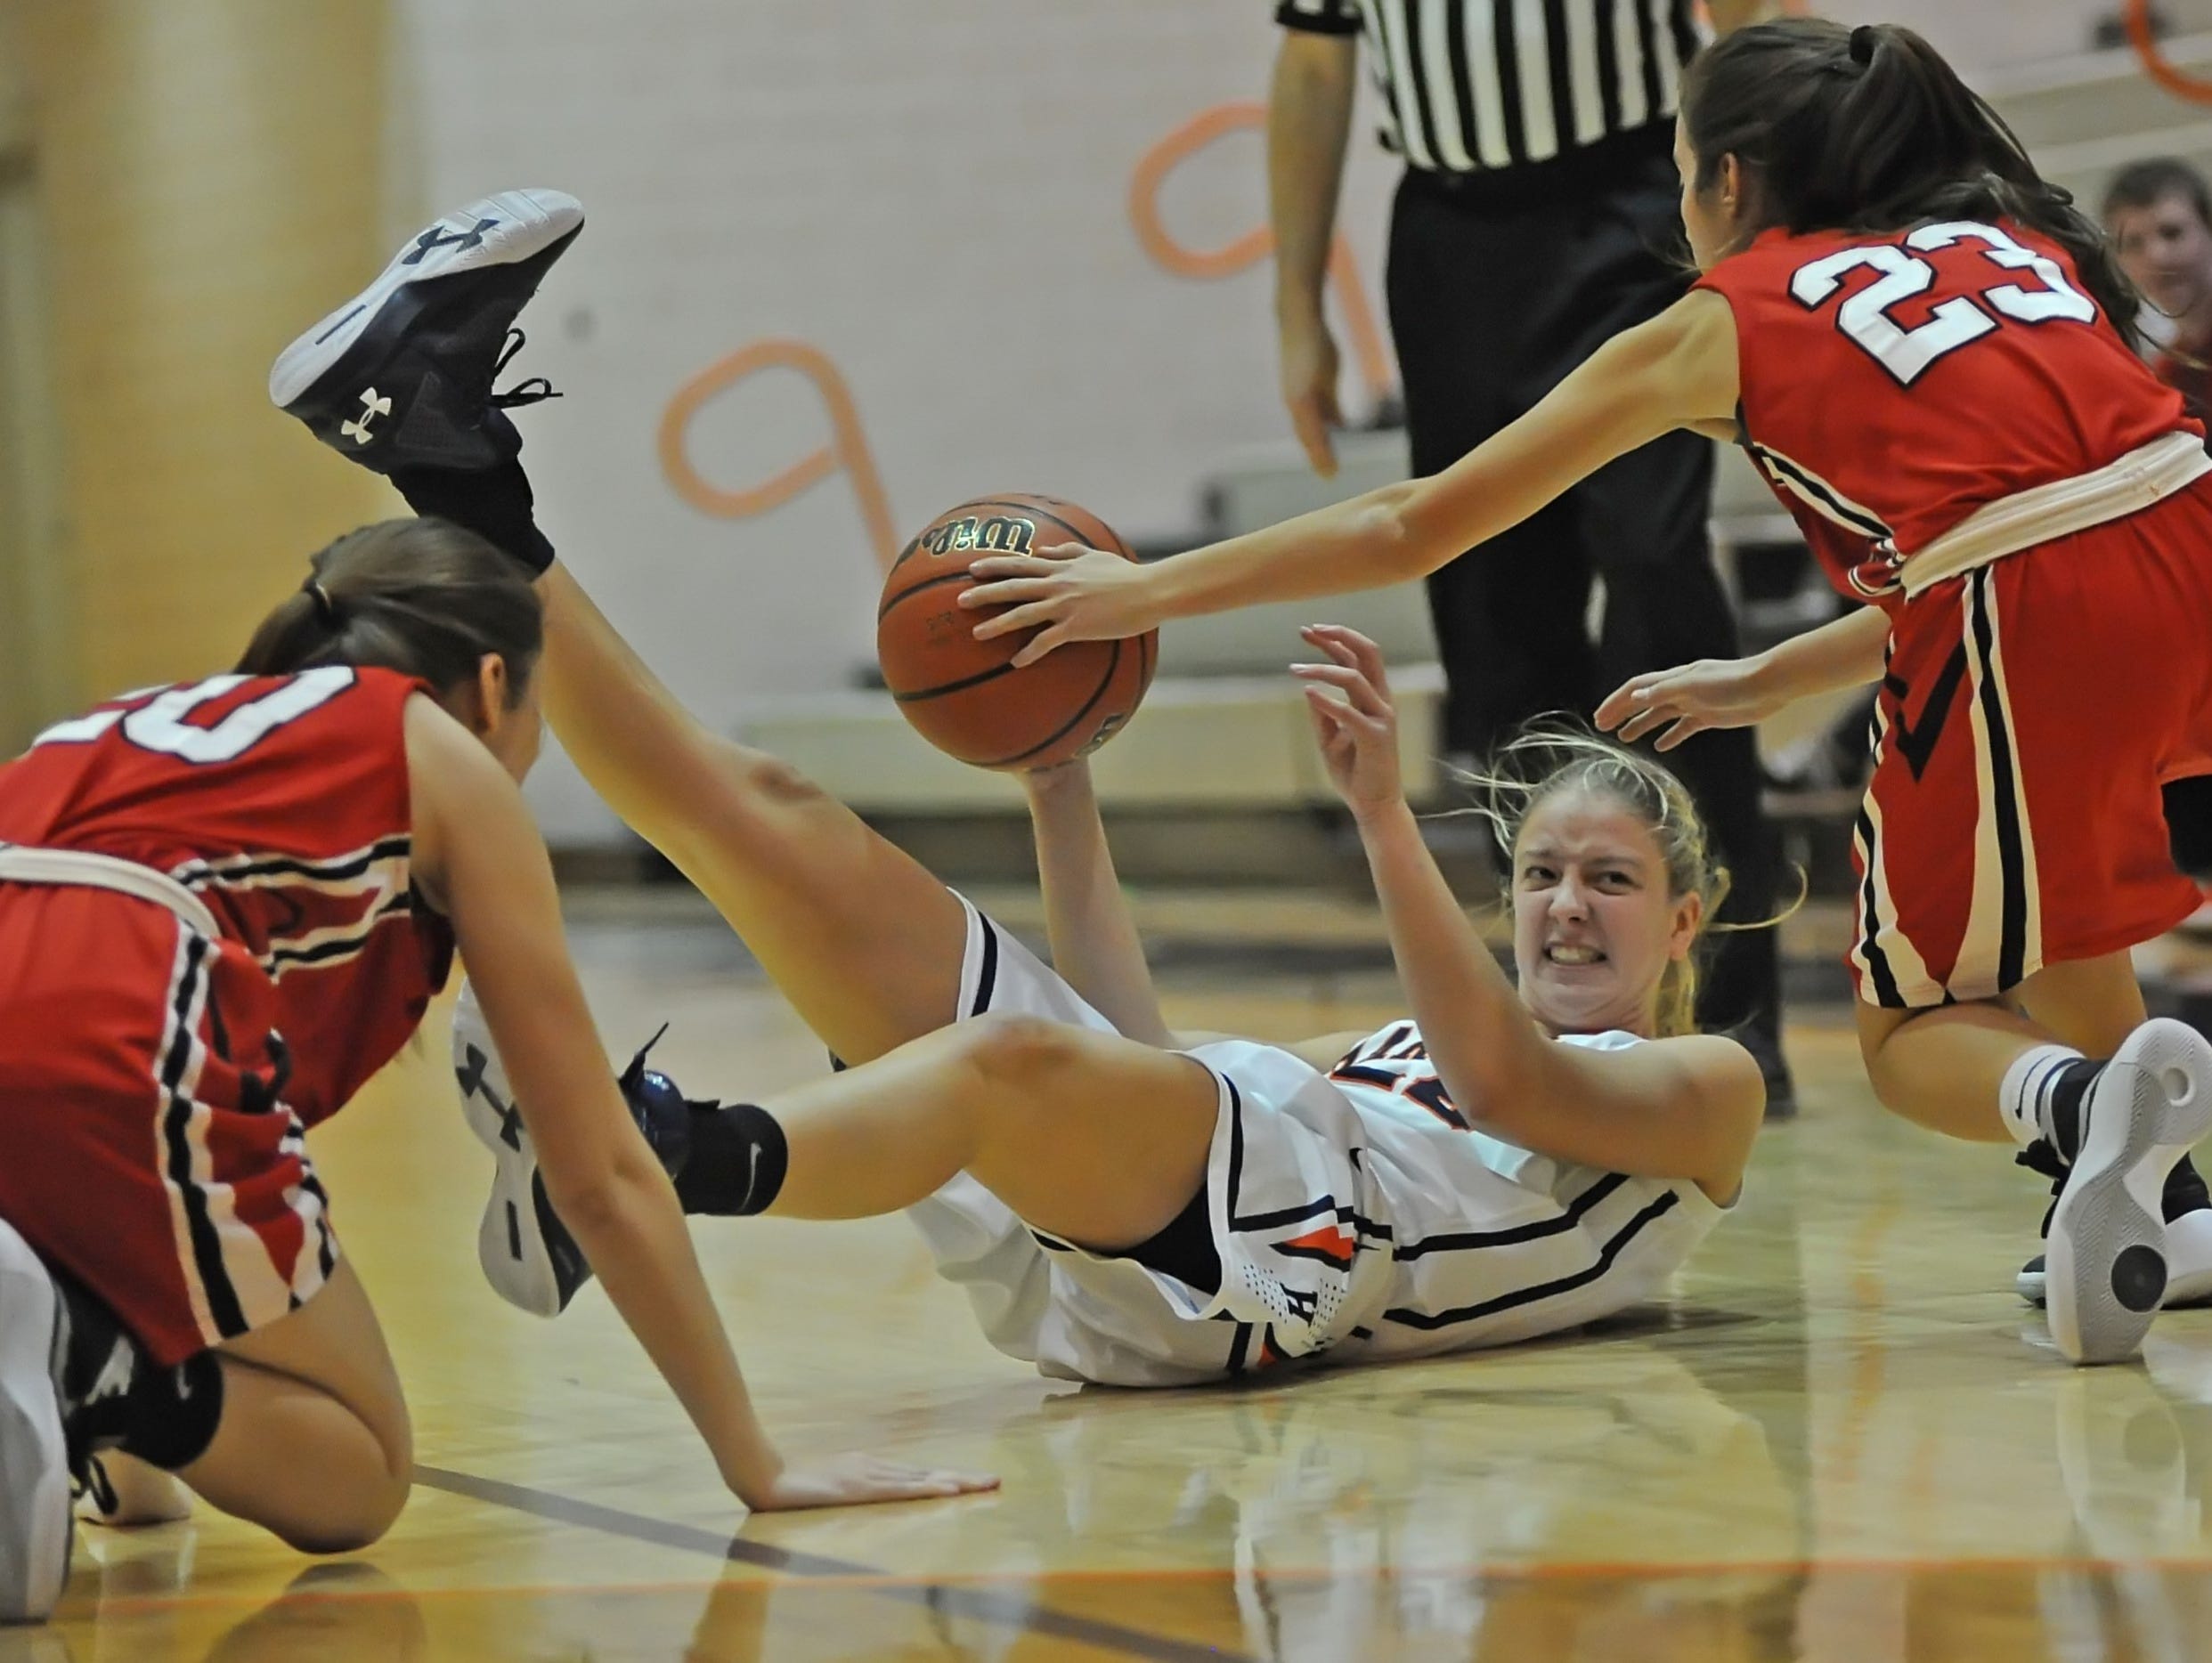 Harrison Senior Erica Rozenboom battles for control from the floor against Katie Hattabaugh and Maggie Gutwein during Friday night's J&C Hoops Classic at Harrison.